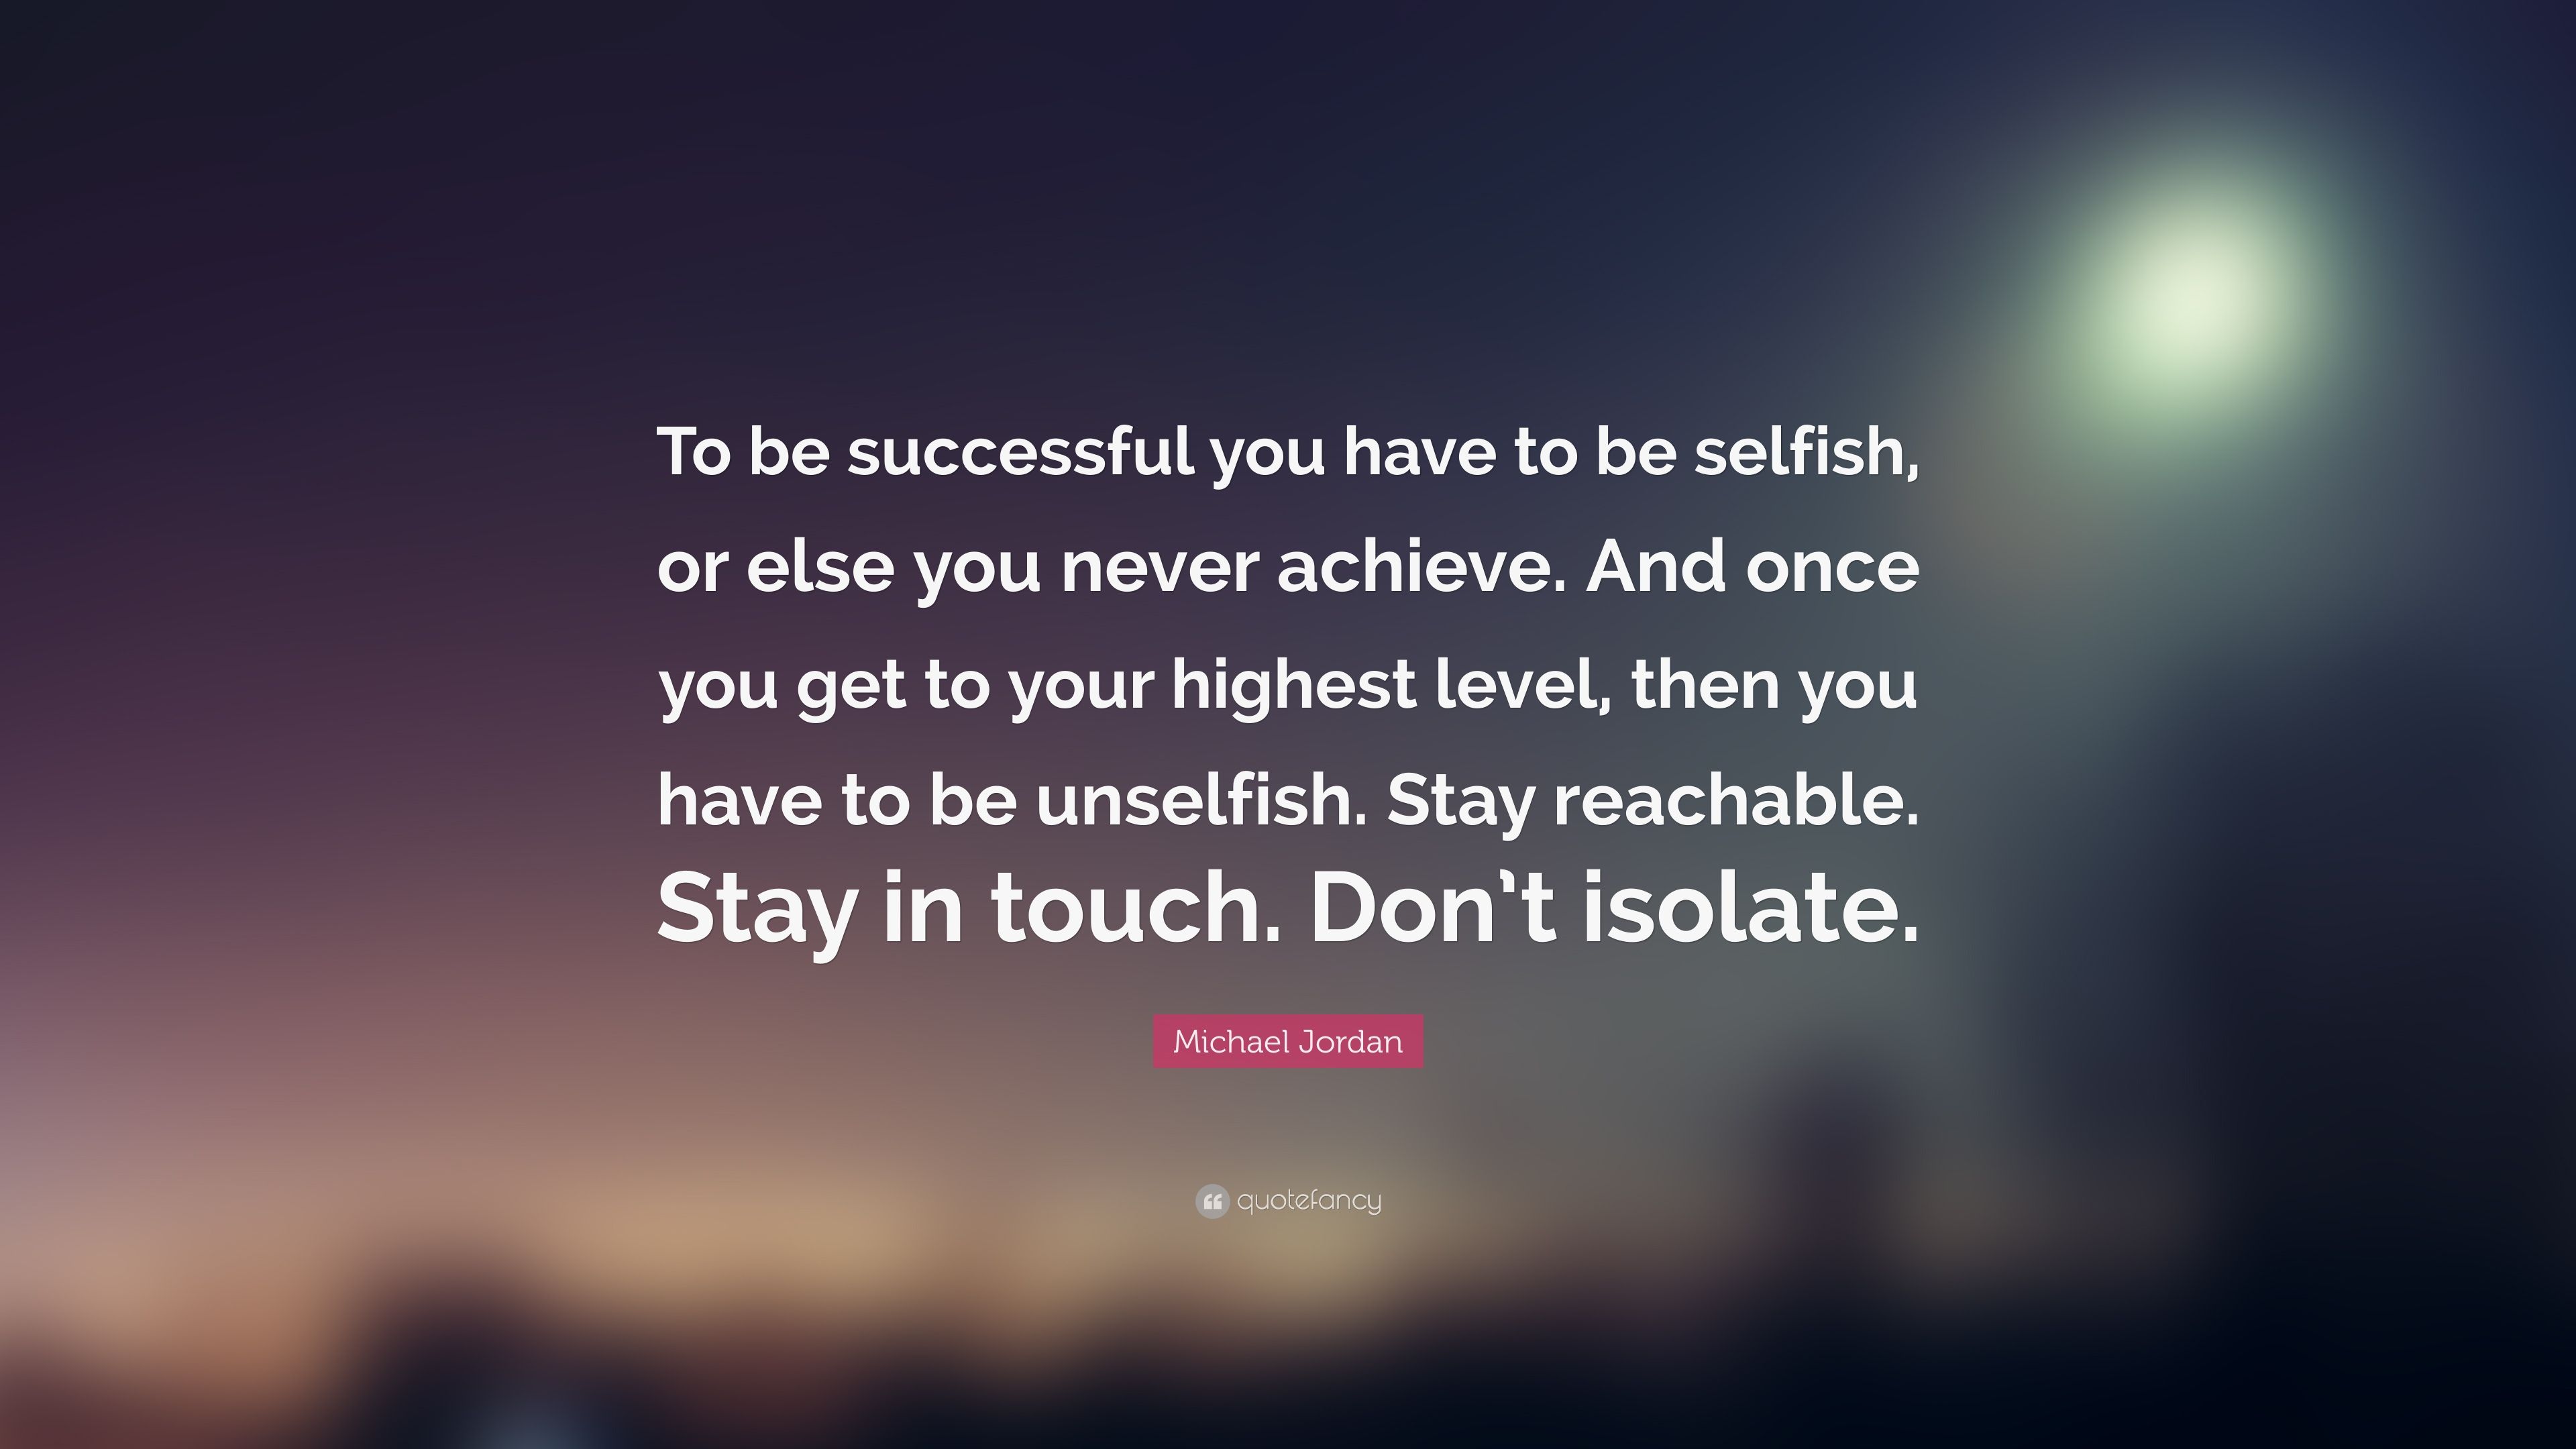 Michael Jordan Quote: “To be successful you have to be selfish, or